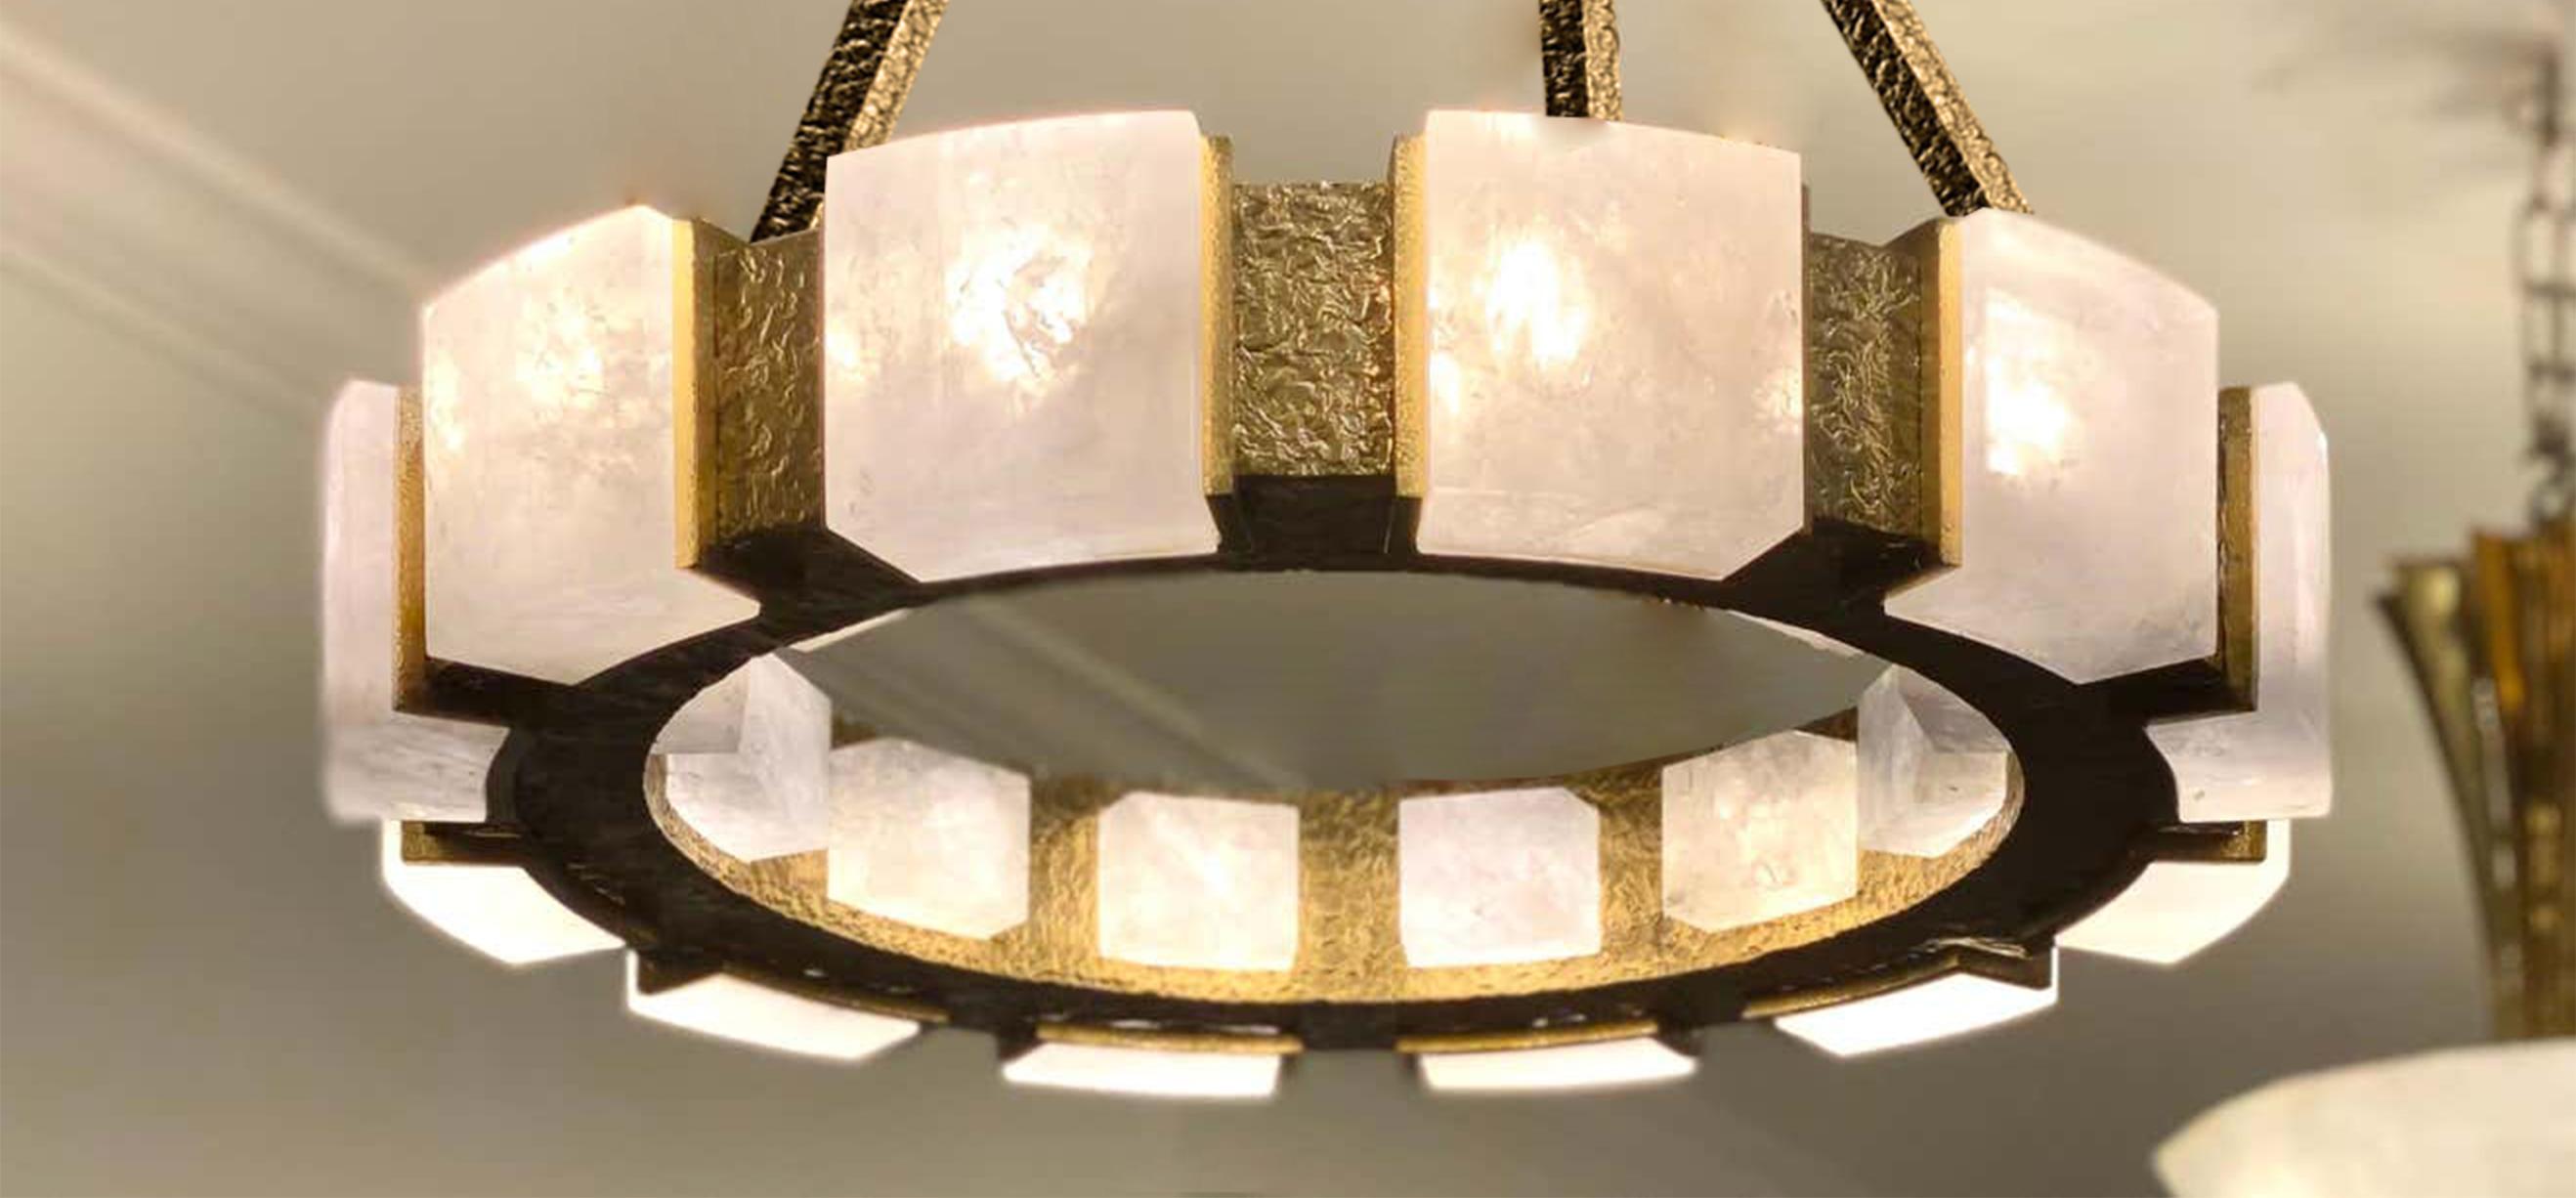 A pair of rock crystal chandeliers with hammered brass detail. Created by Phoenix Gallery, NYC.
12 sockets installed. Use 12 of G9 lightbulbs. 60watts each, total 720w max.
 